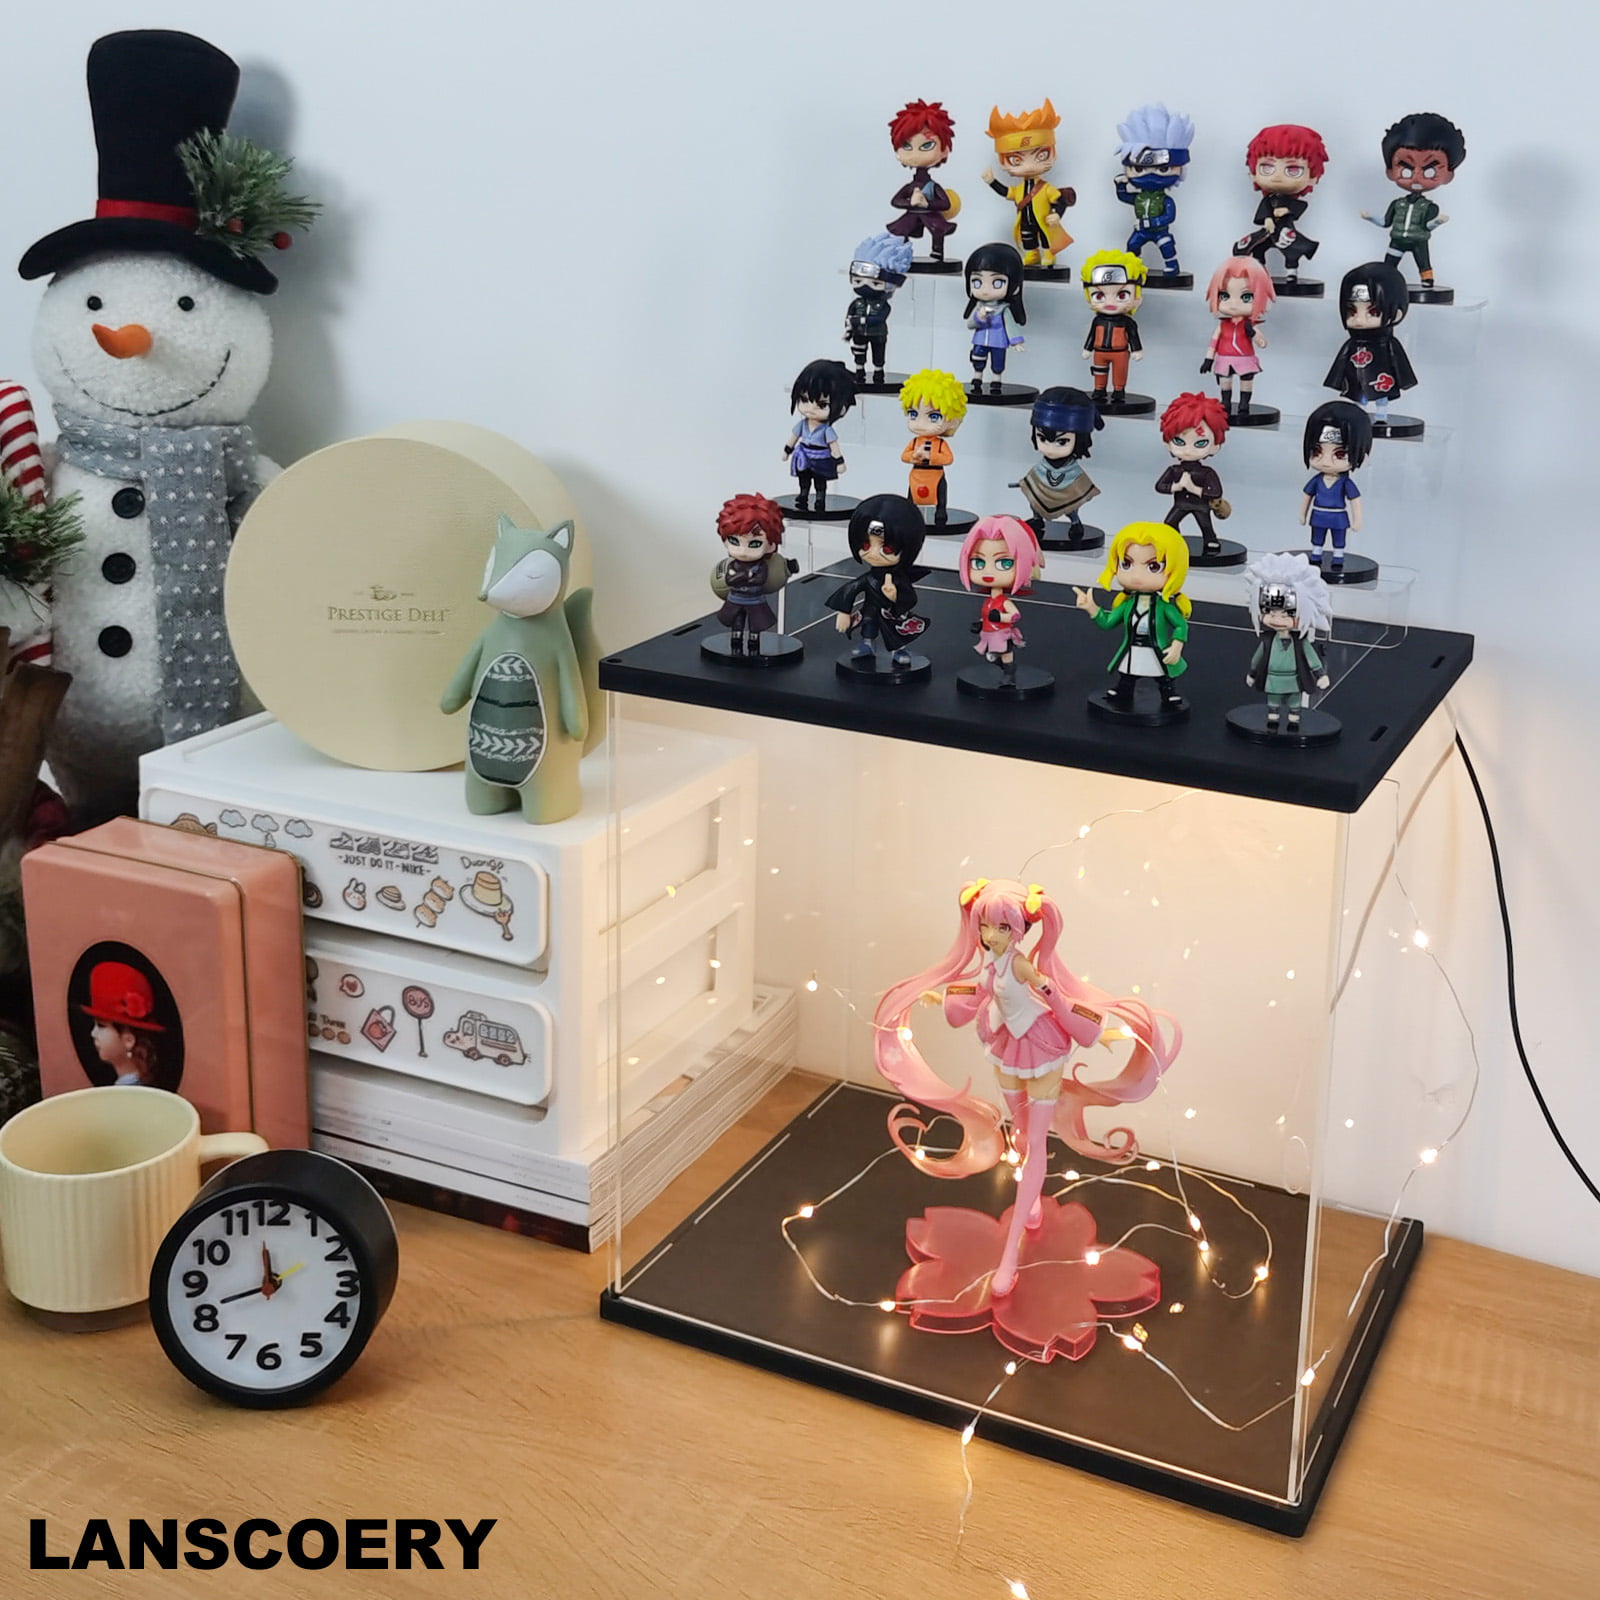 Display Box for Figurine or statue (not moducase) | in Kingston, London |  Gumtree